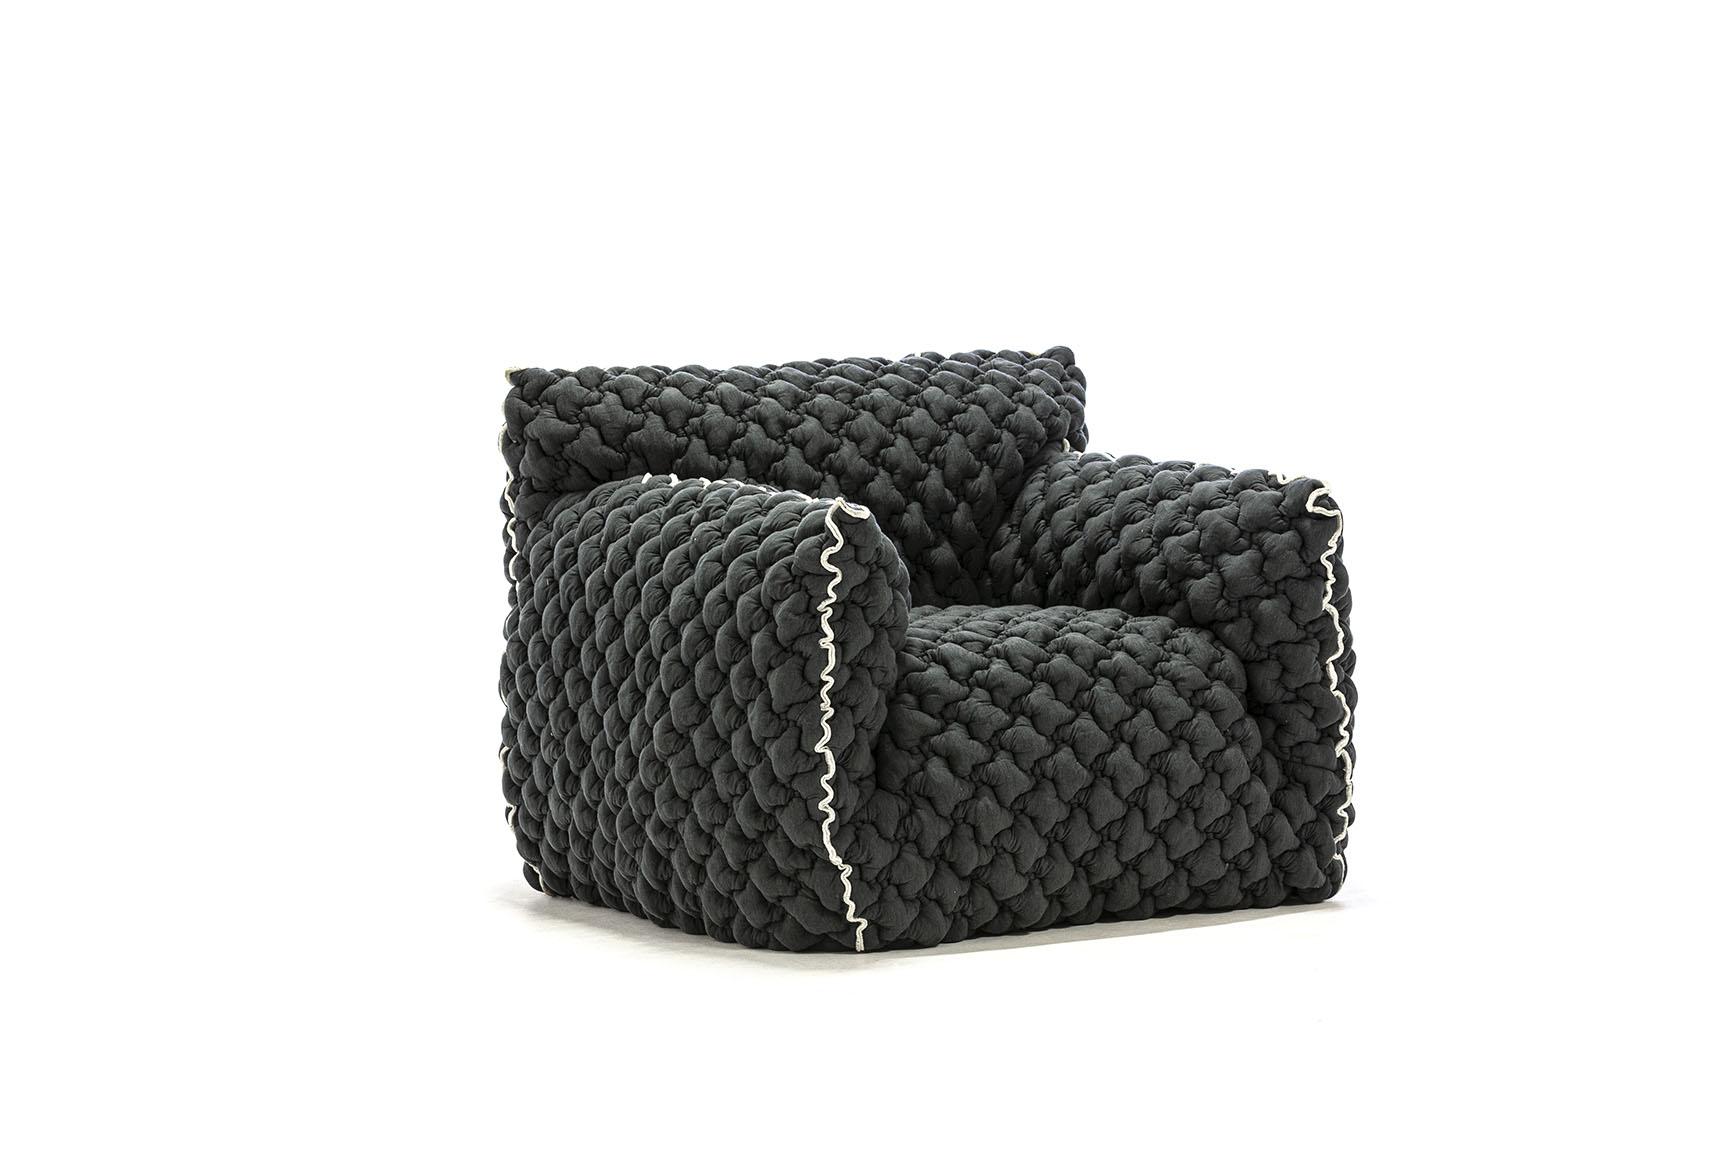 Italian Gervasoni Nuvola 05 Lounge Chair in E- 3D Graffiti Upholstery by Paola Navone For Sale